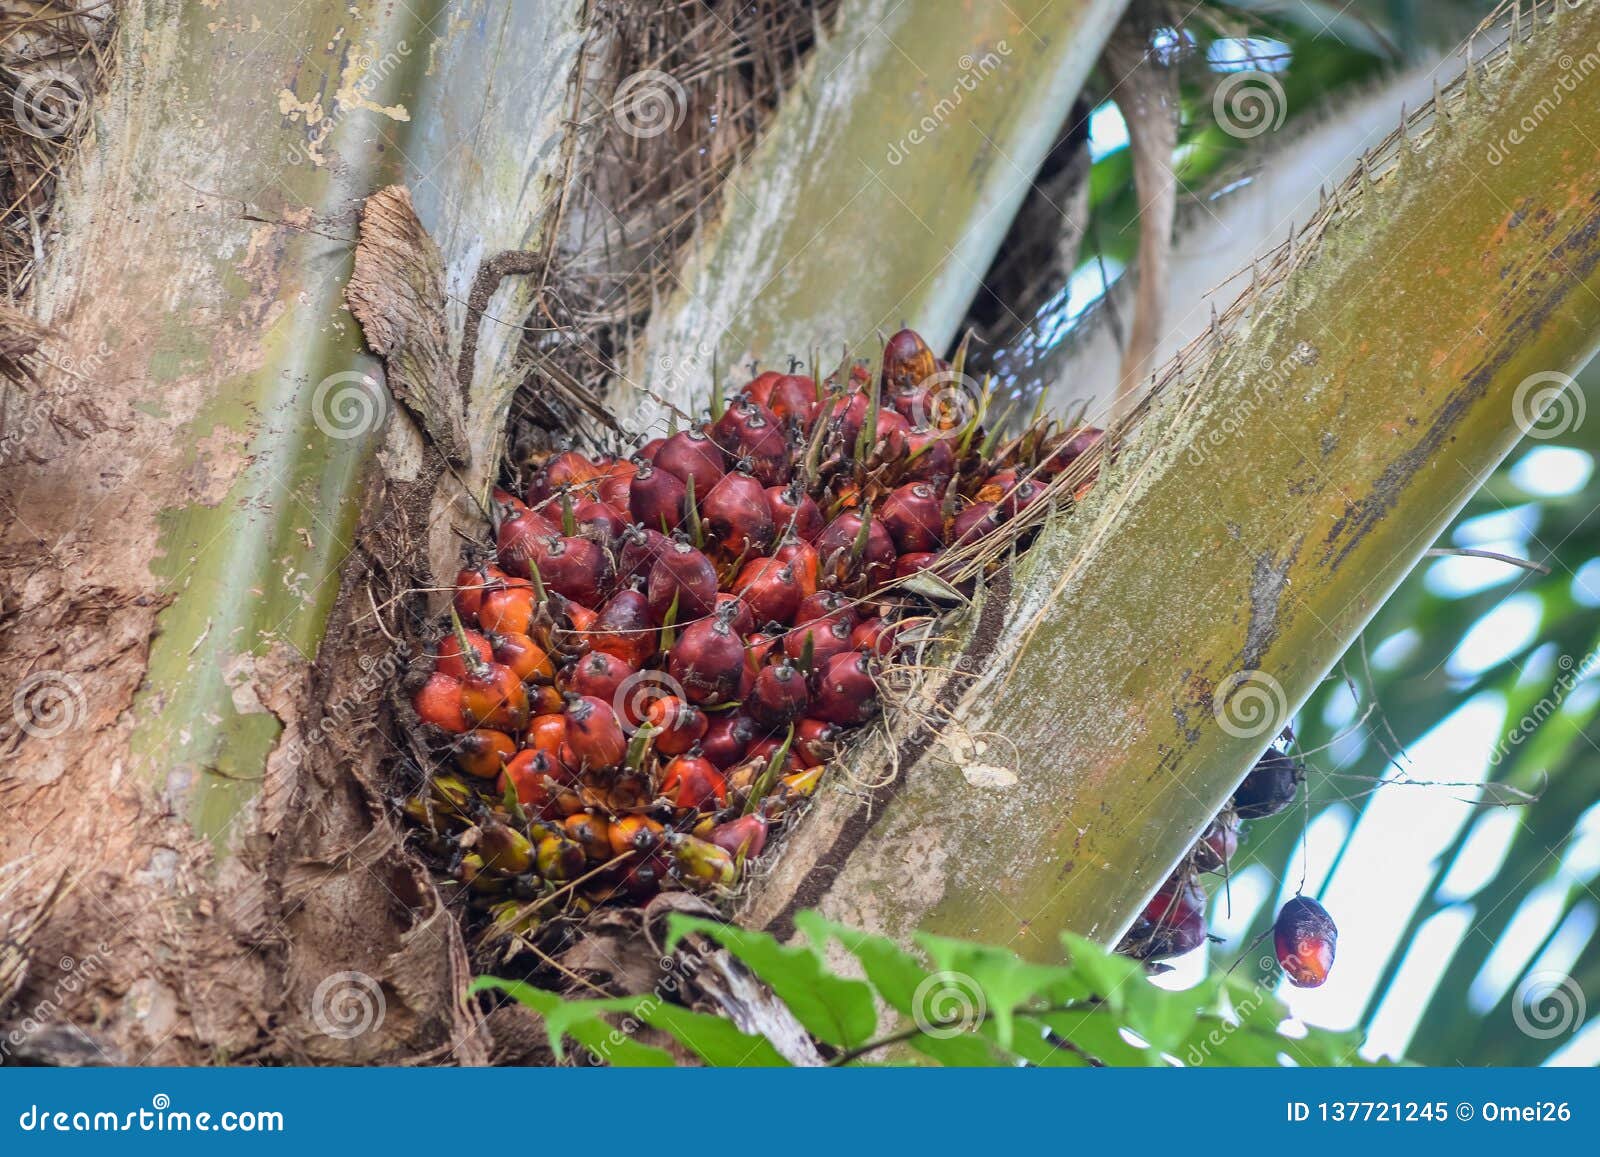 malaysian palm oil fruit ripen on the tree